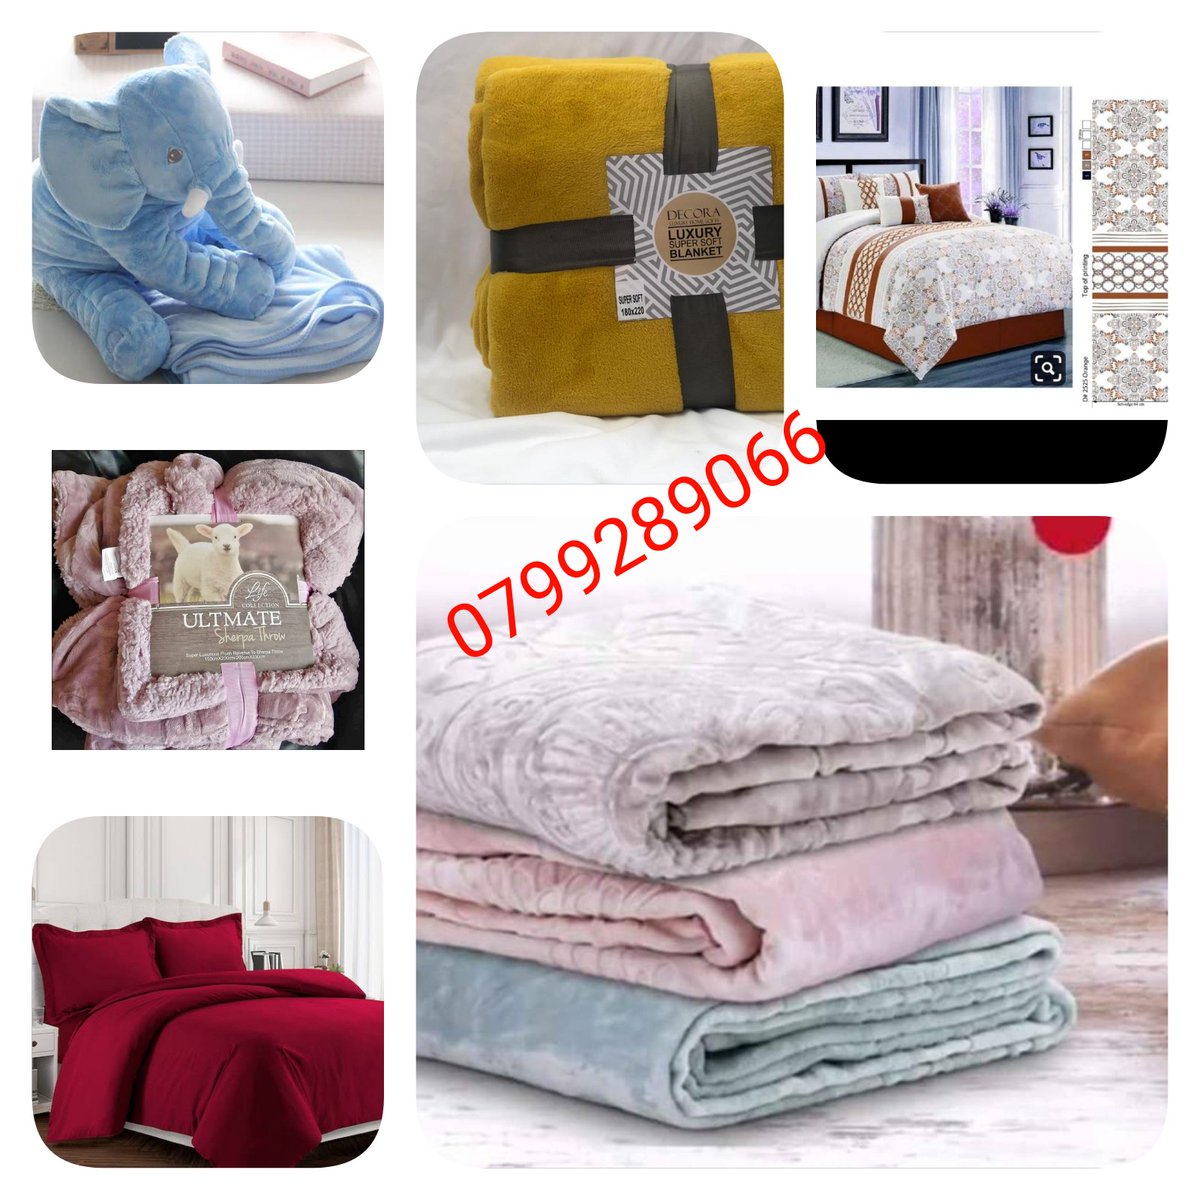 #winterbedding, enjoy winter with bright beautiful beddings #Duvercover, #blankets and other items #prices from as little as R150 u can WhatsApp/call 0799289066